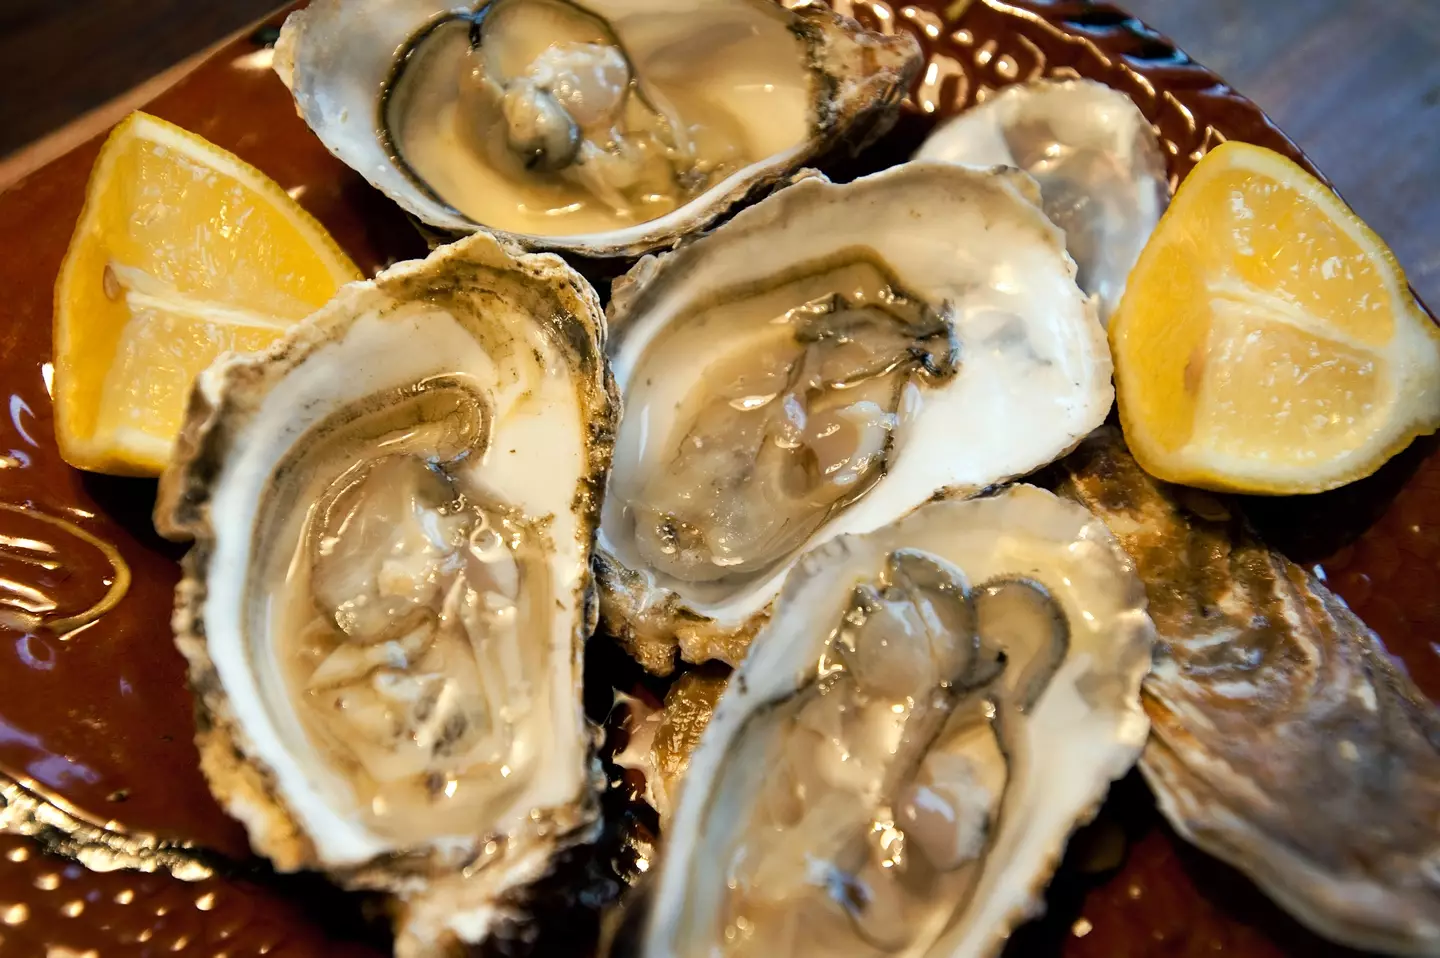 The customer was the only one to get ill after eating the oysters.